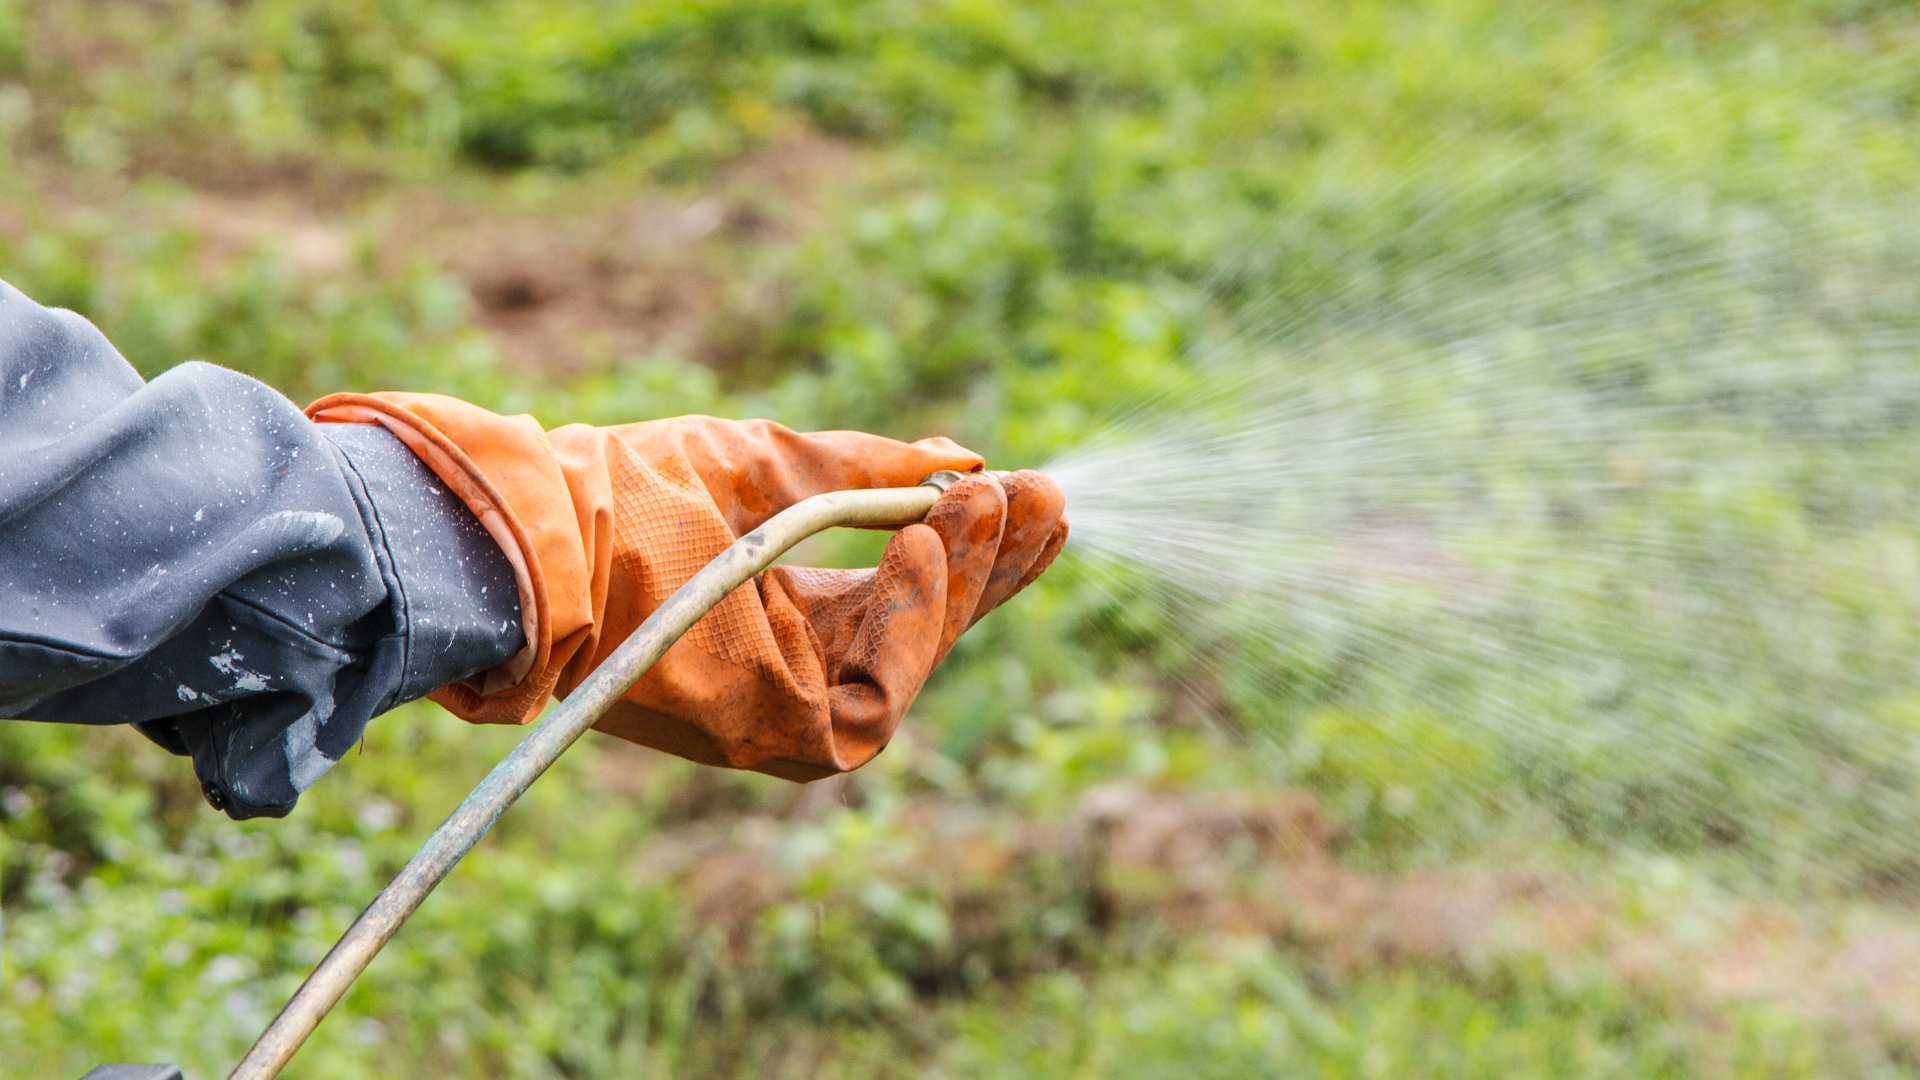 Is Pre-emergent Weed Control Really Worth the Money?